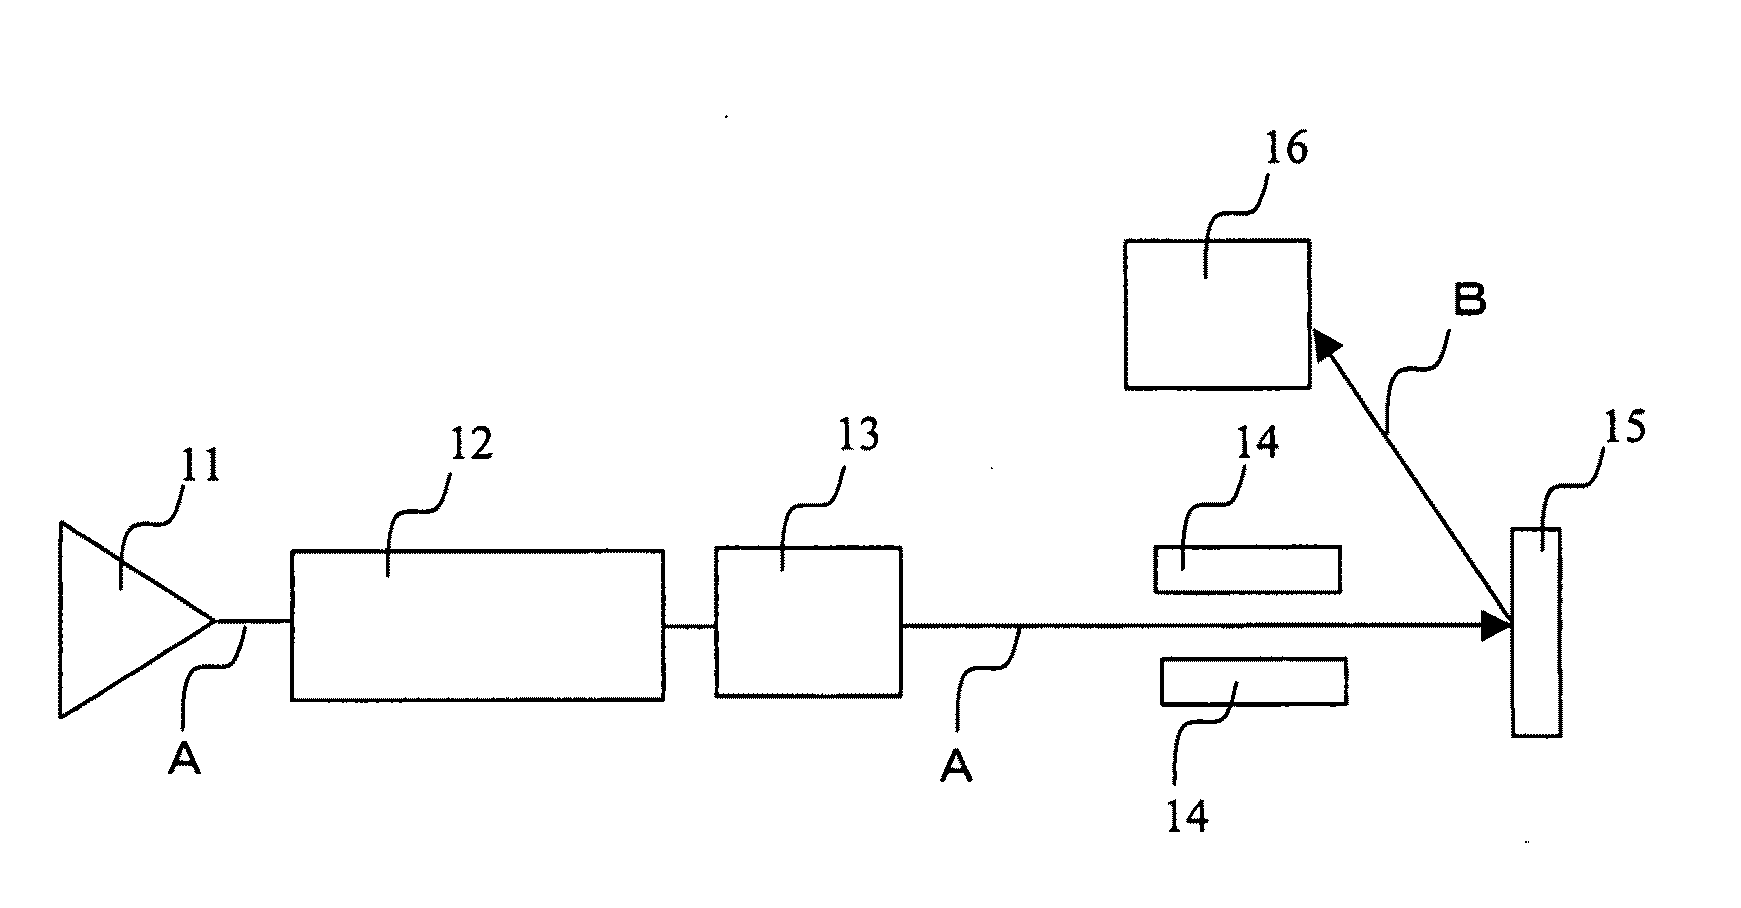 Second ion mass spectrometry method and imaging method